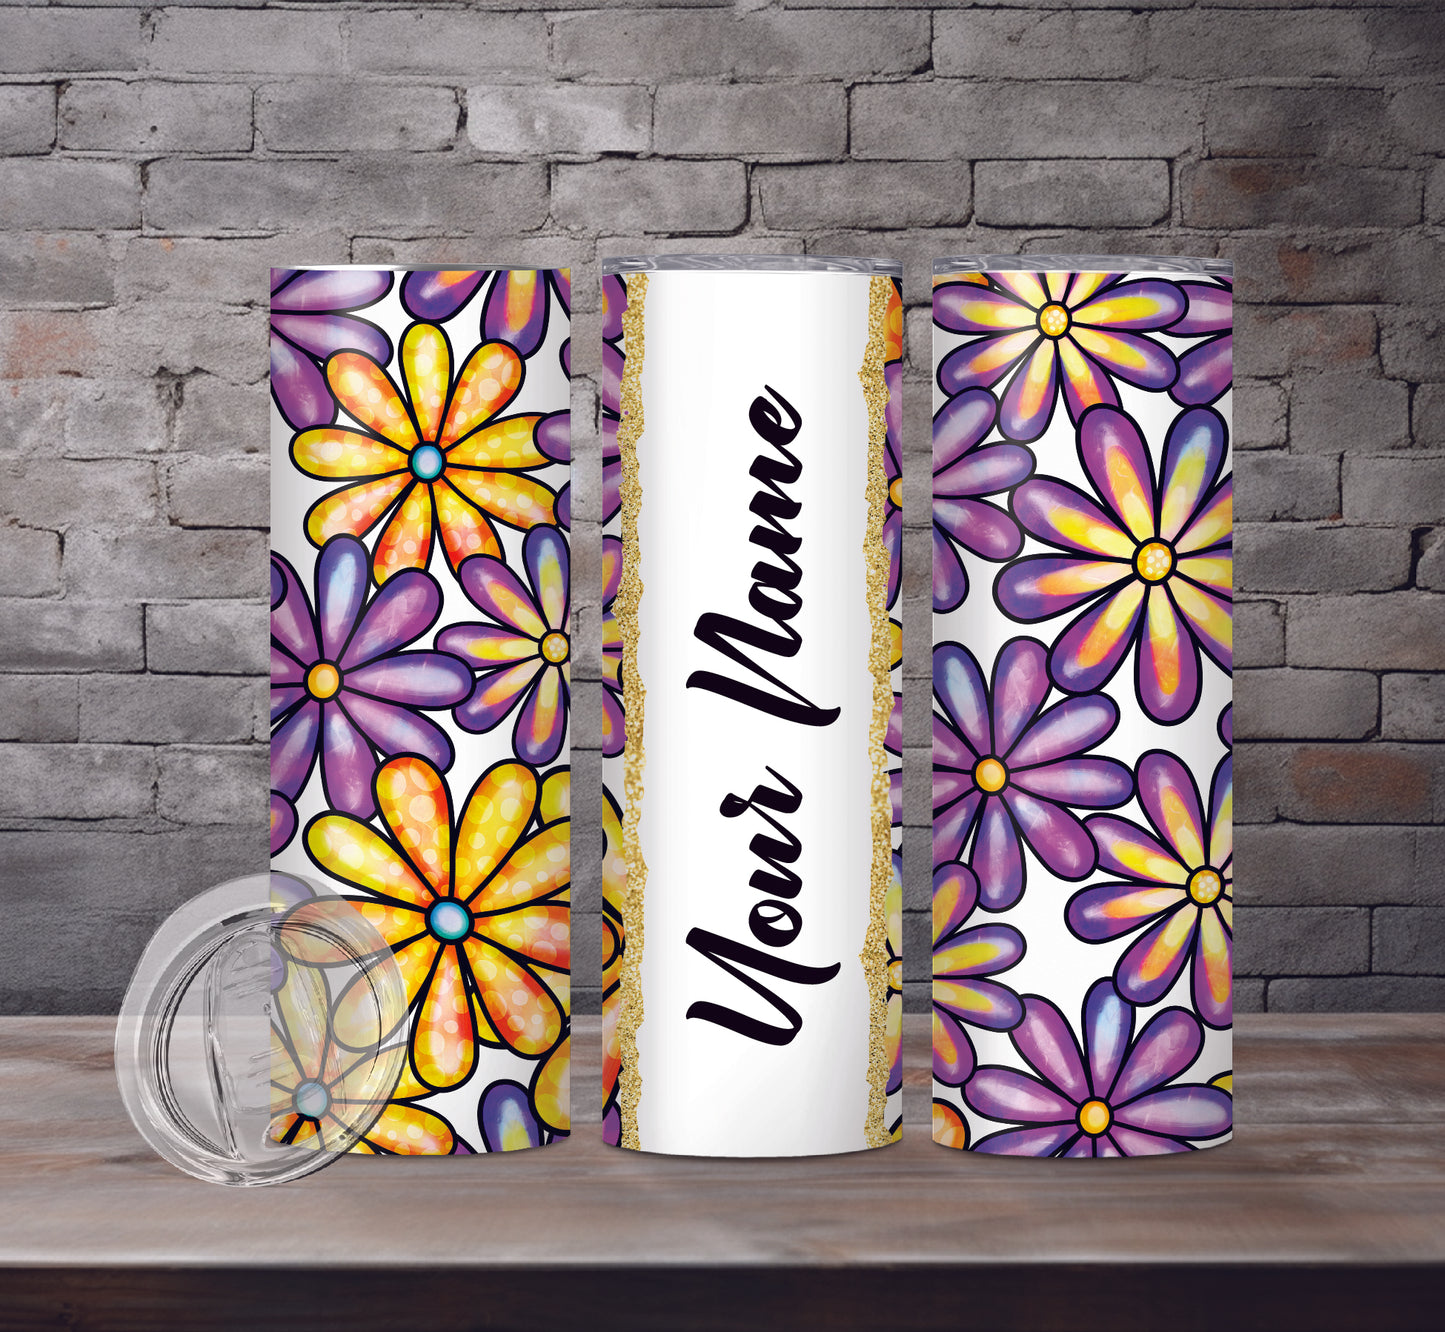 Floral Add Your Name Drink Tumblers, 18 Designs